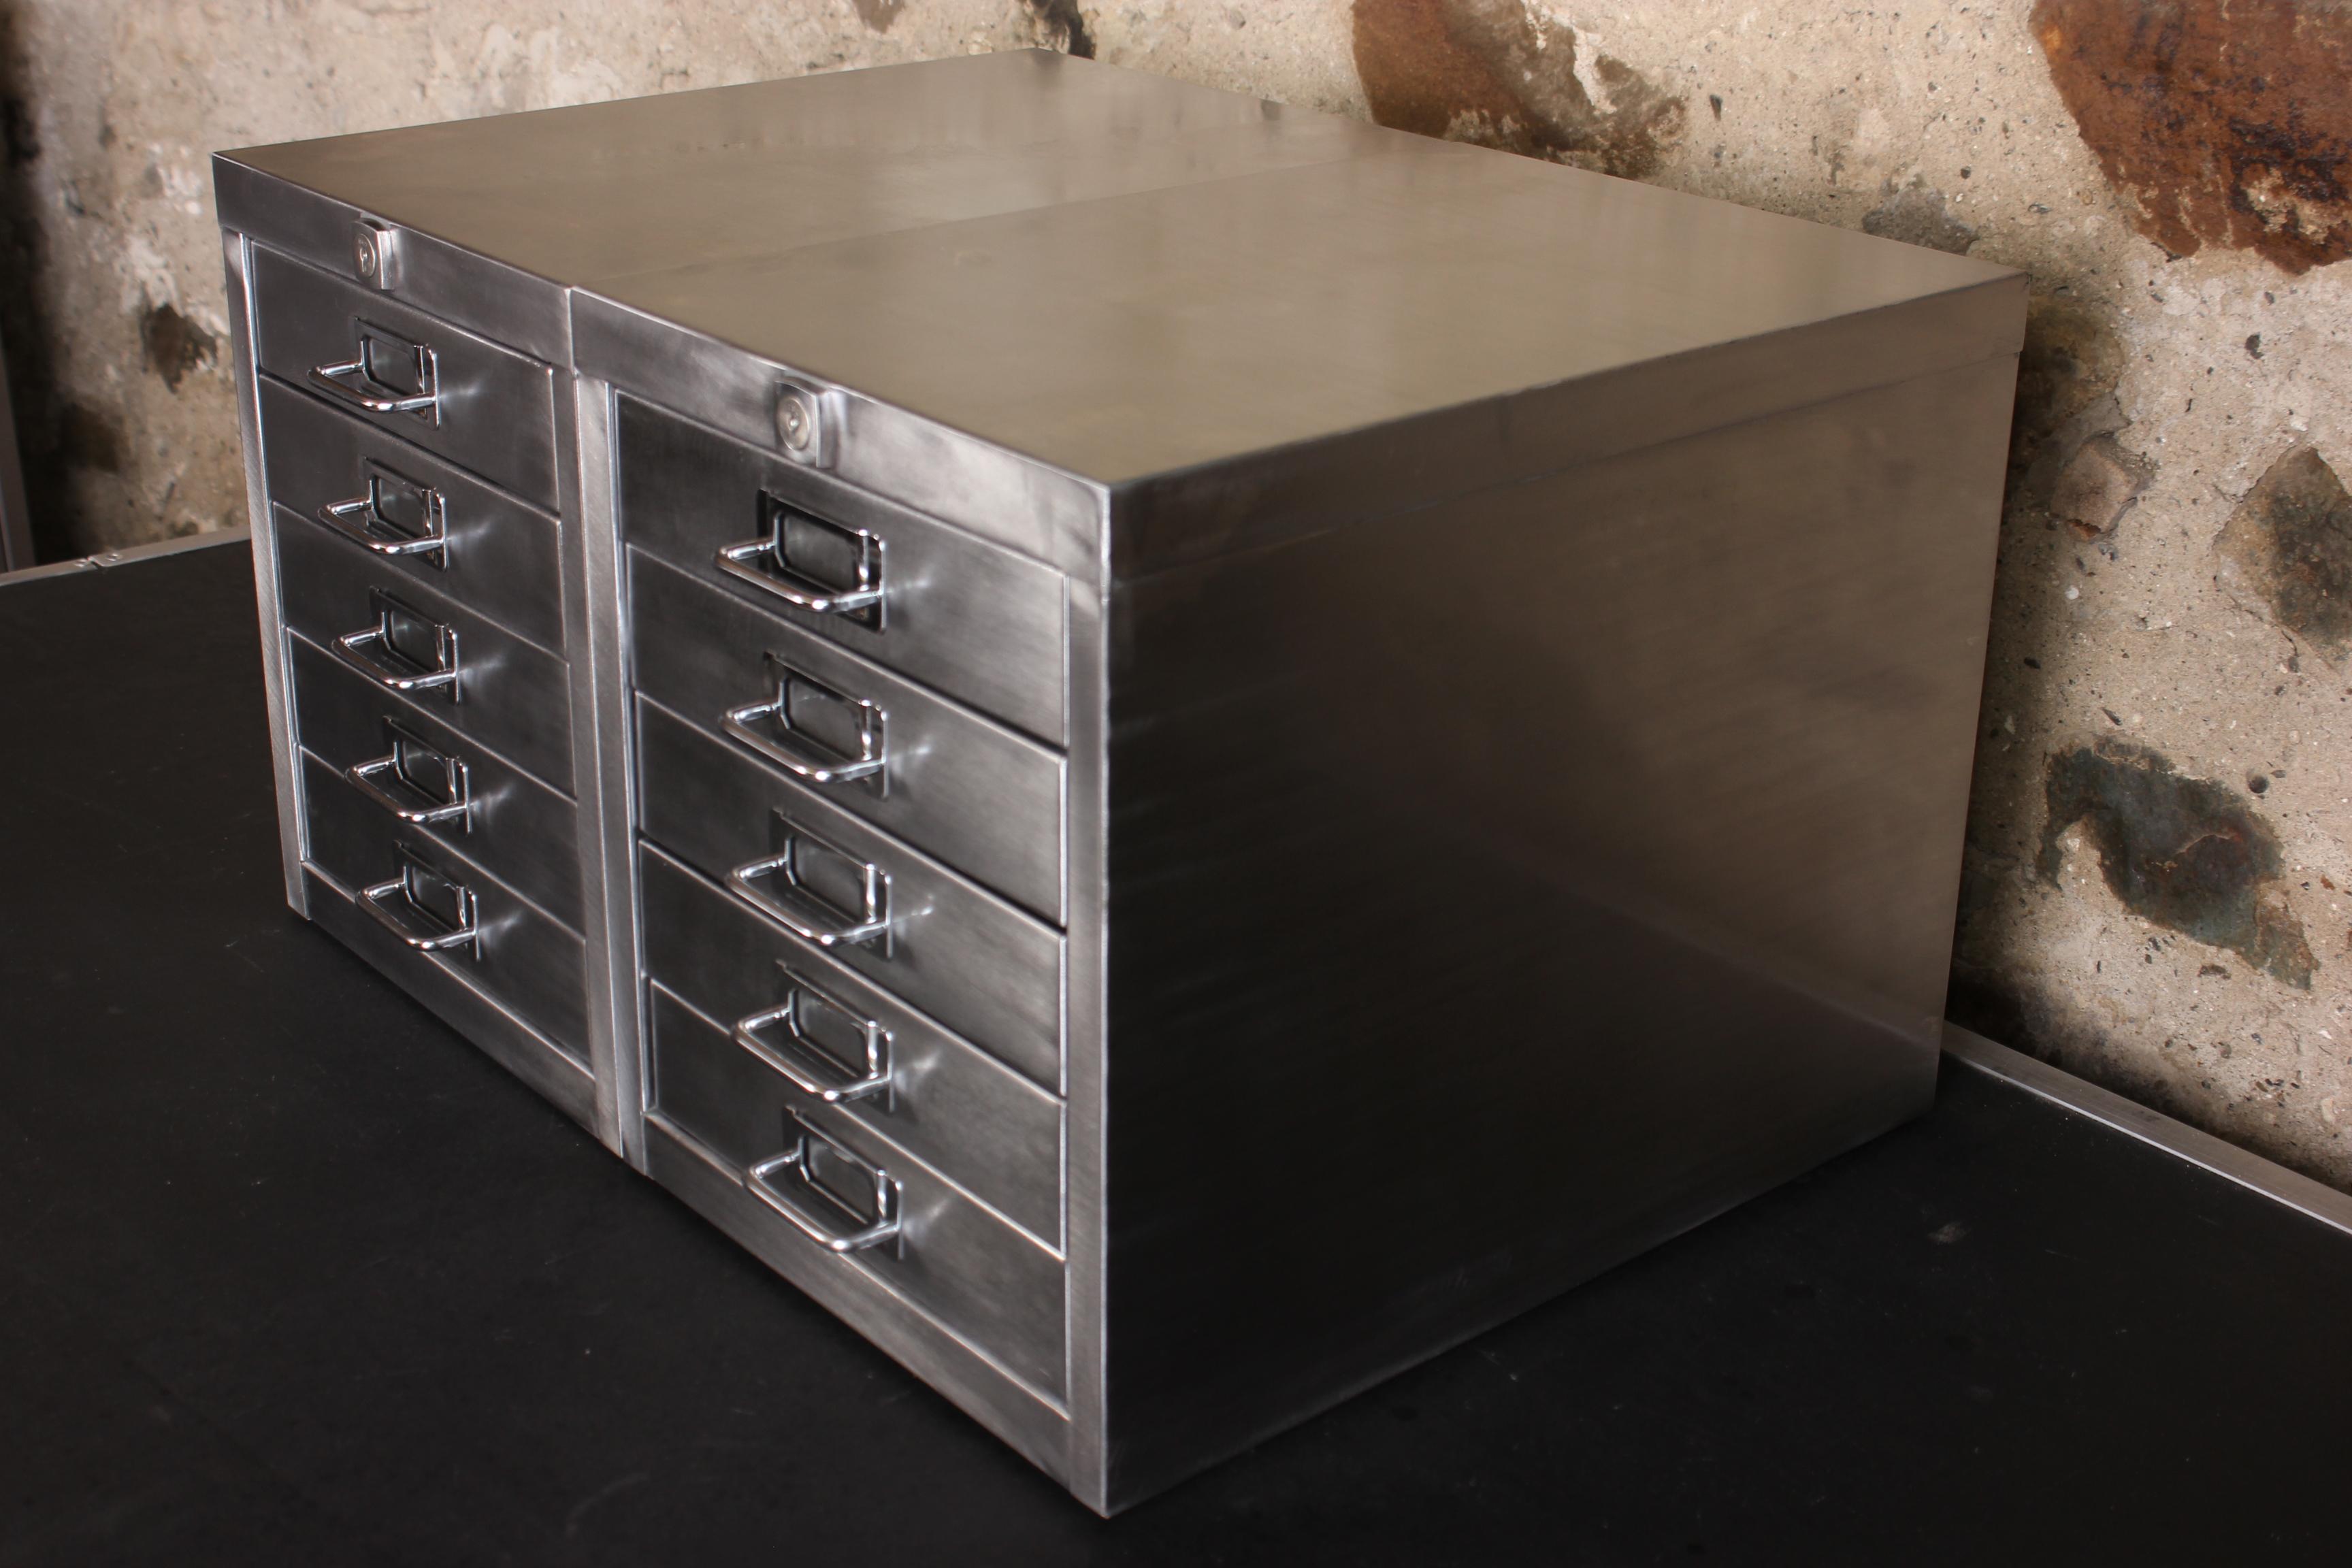 A stunning pair of vintage 1980s industrial stripped metal 5-drawer filing cabinets complete with keys. These impressive desk top industrial design pieces have been stripped back to bare metal and were manufactured in the United Kingdom during the